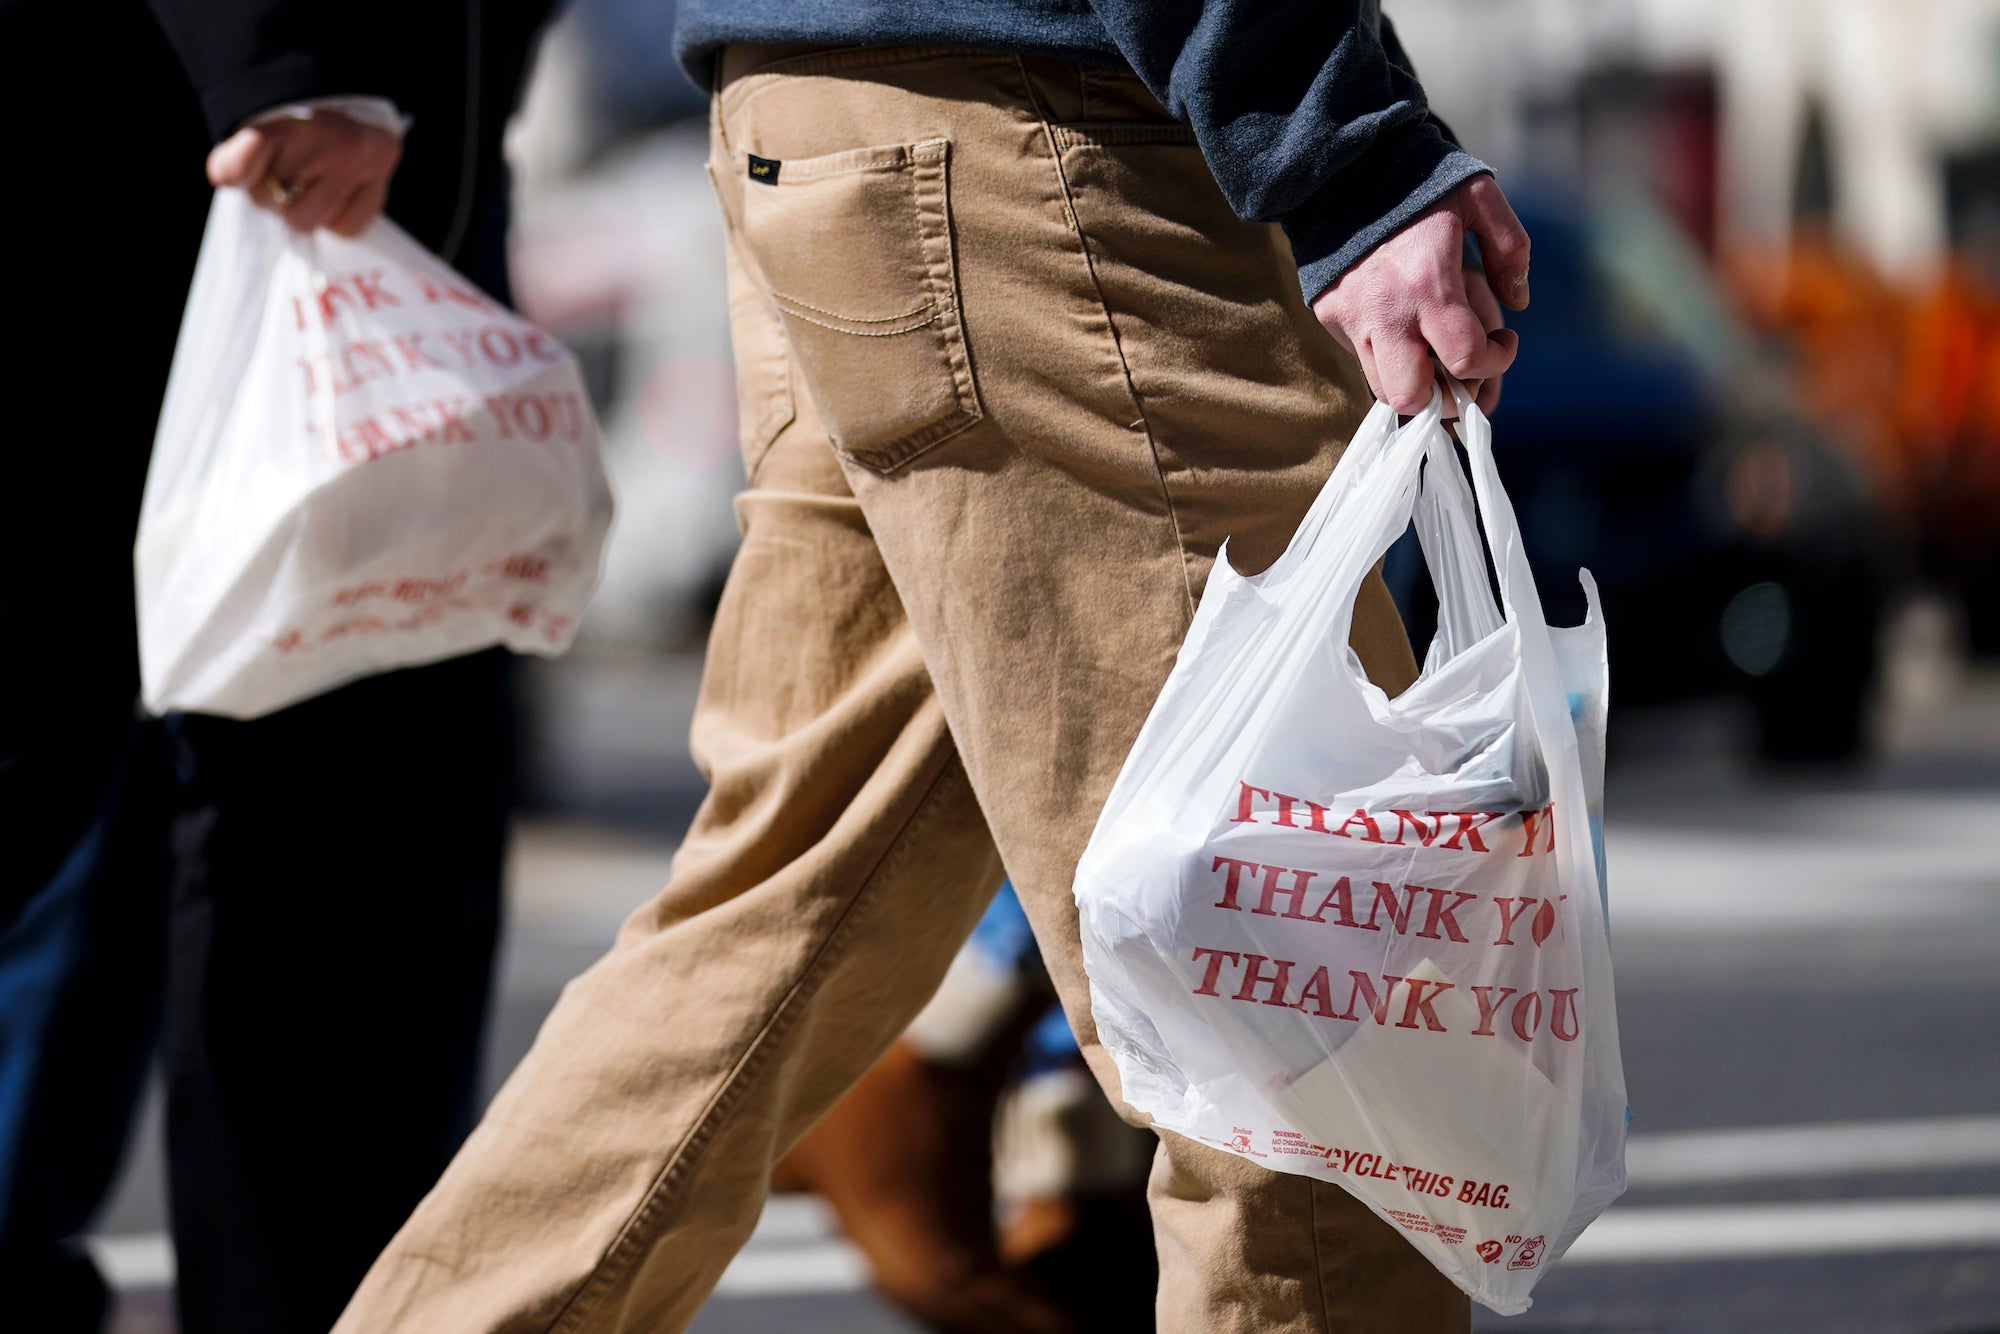 New Jersey bans plastic and paper bags as of 2022